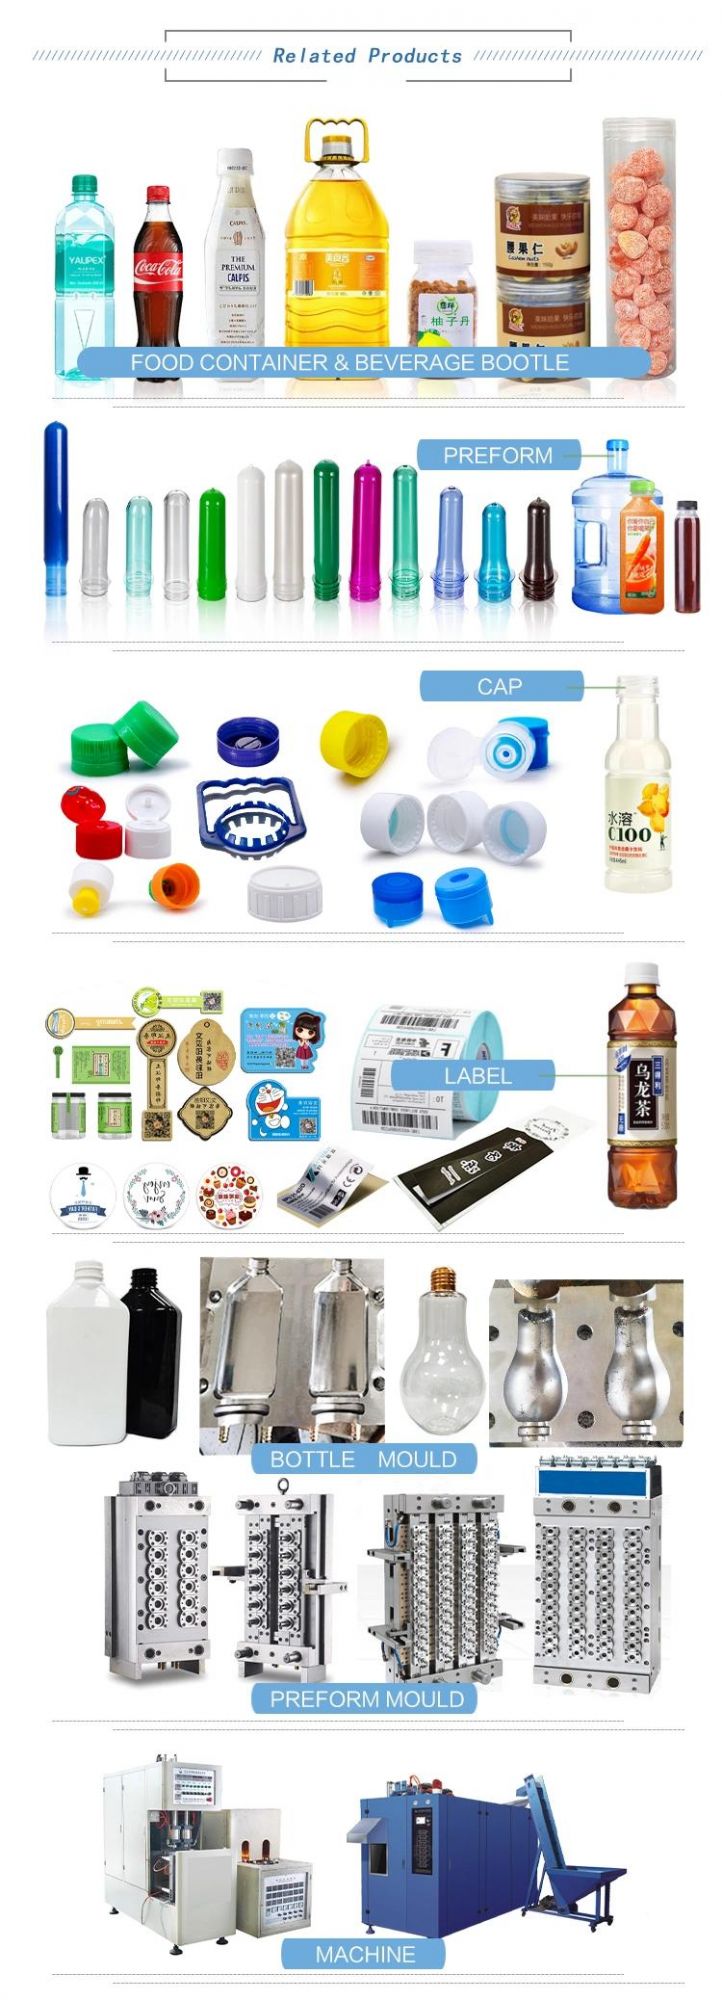 45mm 46mm 48mm Plastic Pet Preform for Bottle with Cap and Handle